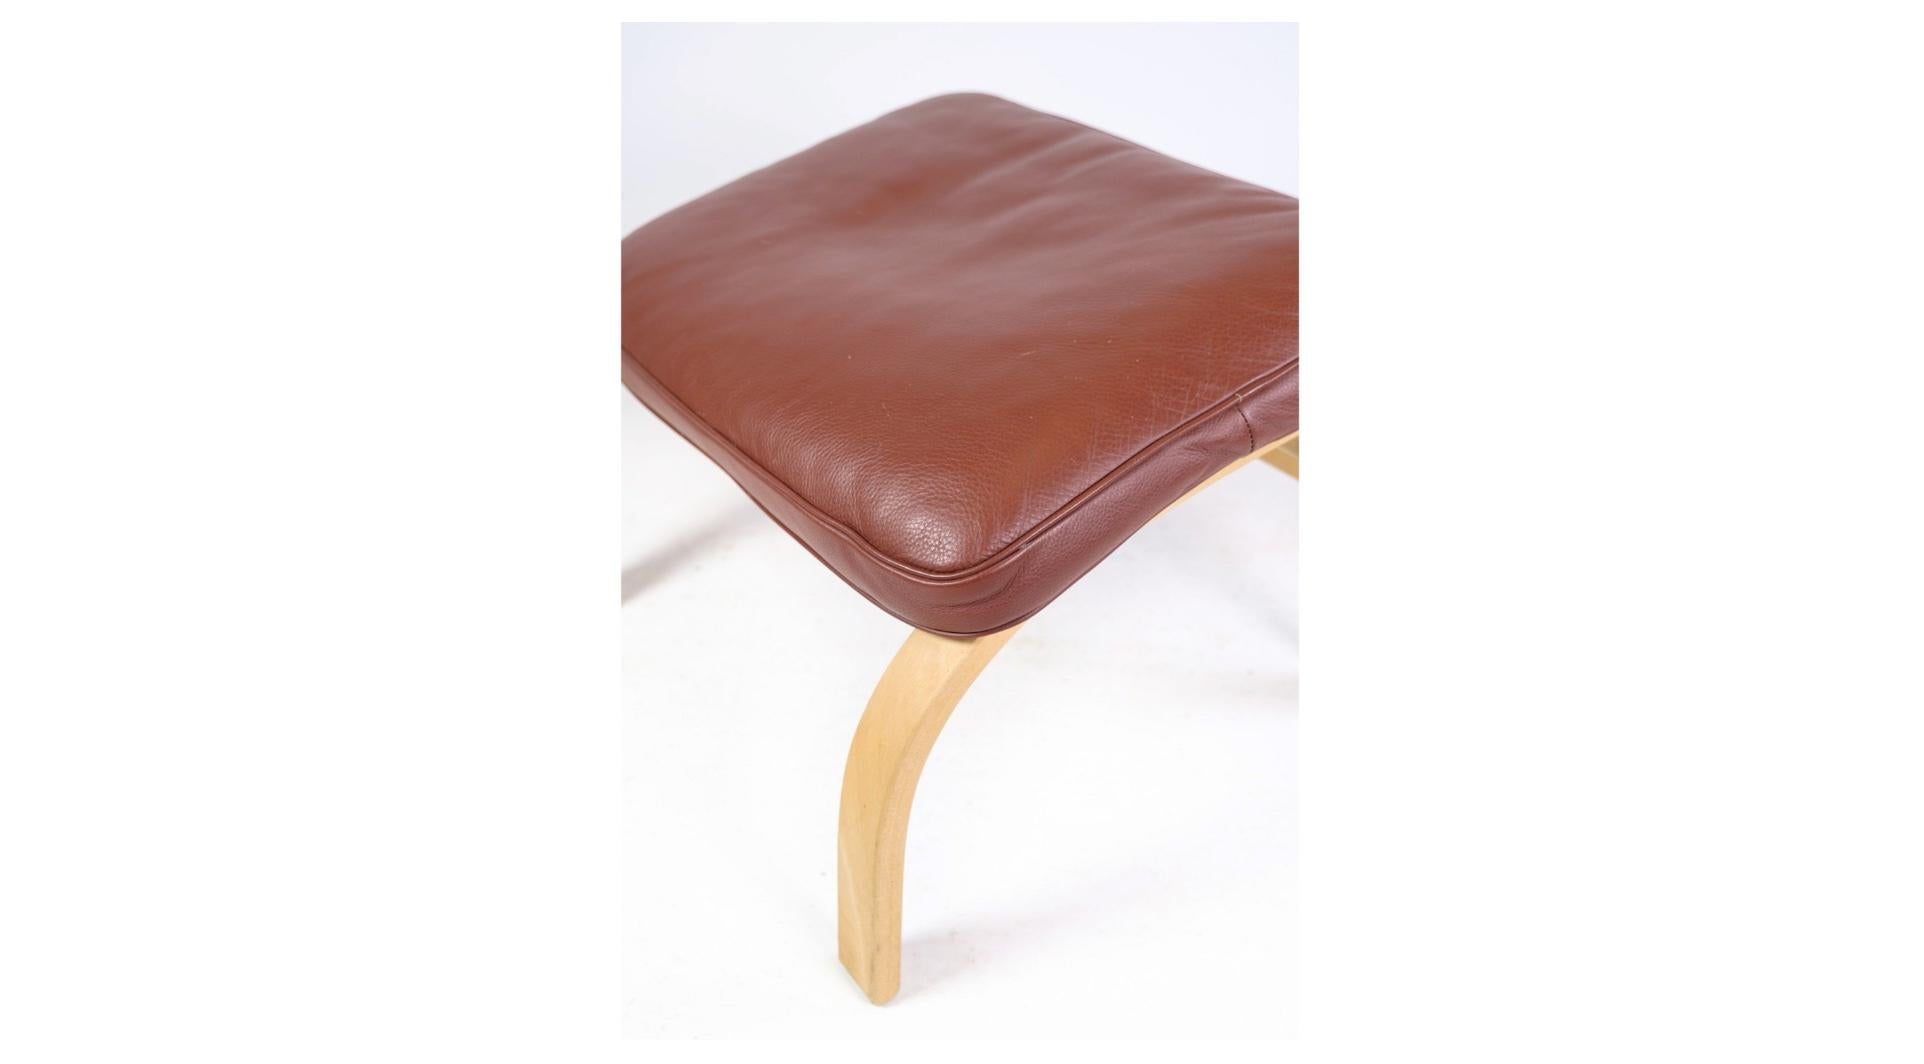 This stool, model MH 101, is a beautiful example of Danish design from the 1960s. It was designed by Mogens Hansen, a renowned furniture designer known for his focus on craftsmanship and functionality. The stool has elegant legs made of light oak,